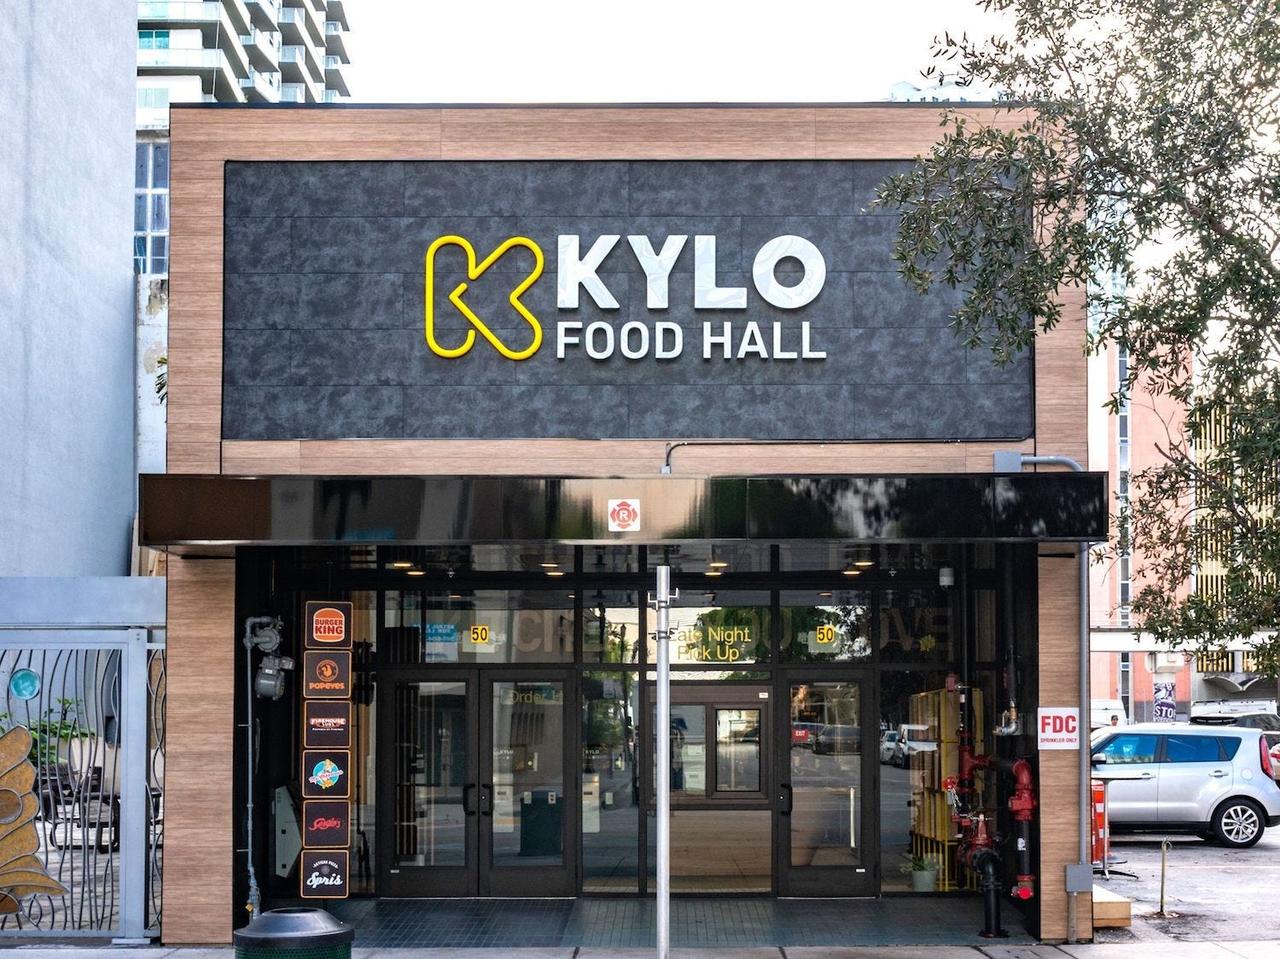 Burger King's parent company opened KYLO Food Hall in Miami.